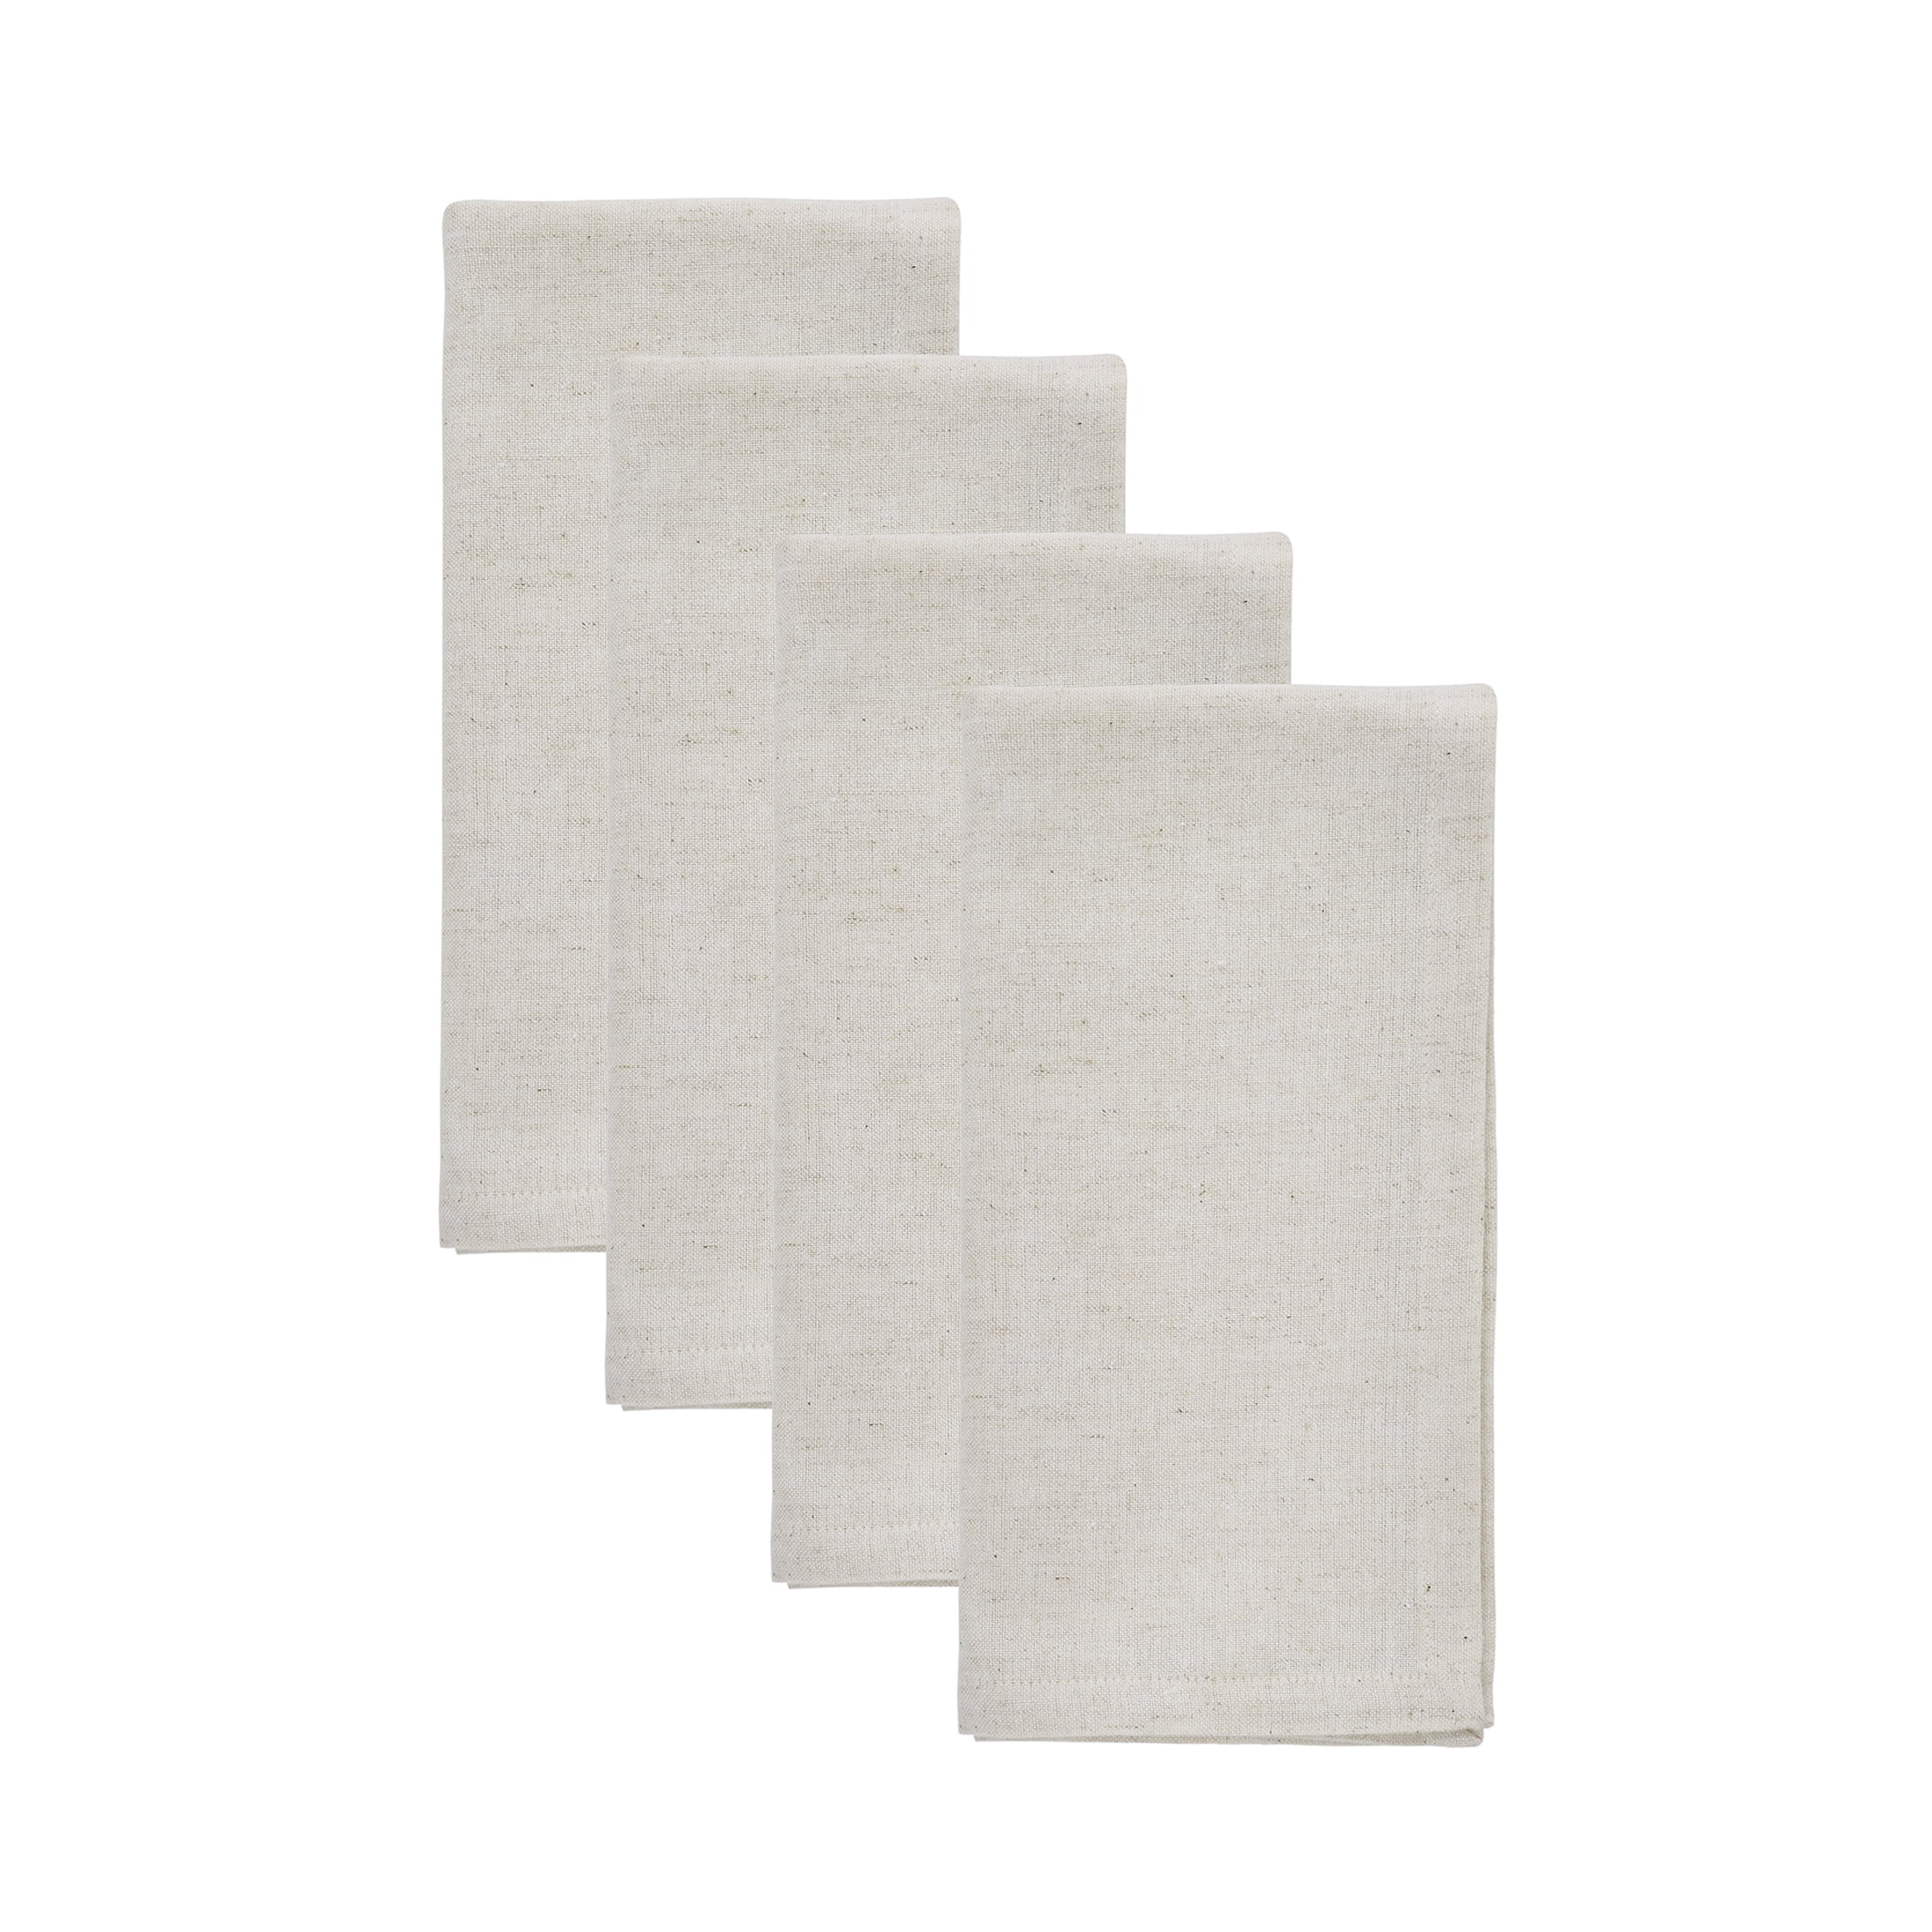 My Texas House Solid Cloth Dinner Table Napkins, 4 Pieces, Beige